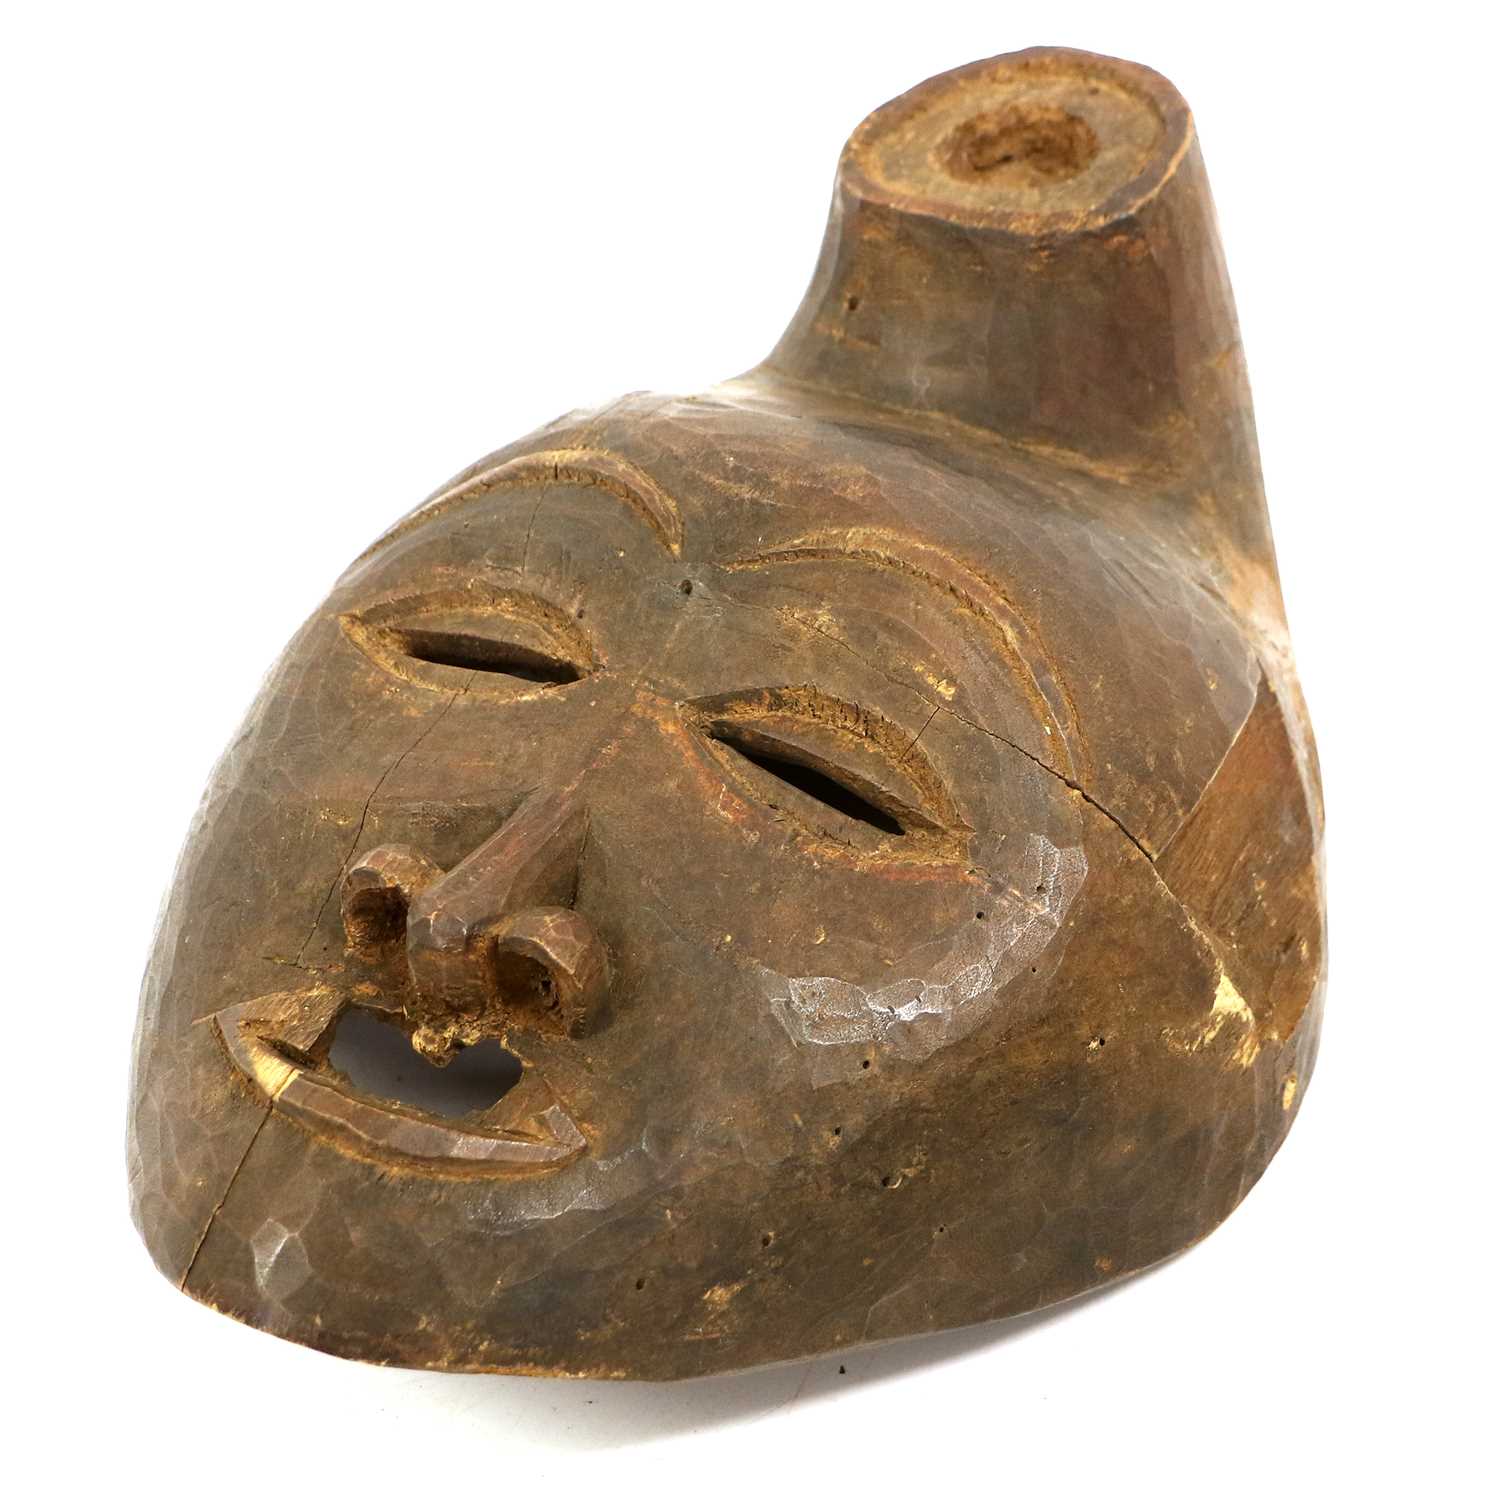 A Dan Small Carved Wood Mask, Ivory Coast, with heart shape face, pierced swollen eyelids, long nose - Image 5 of 6